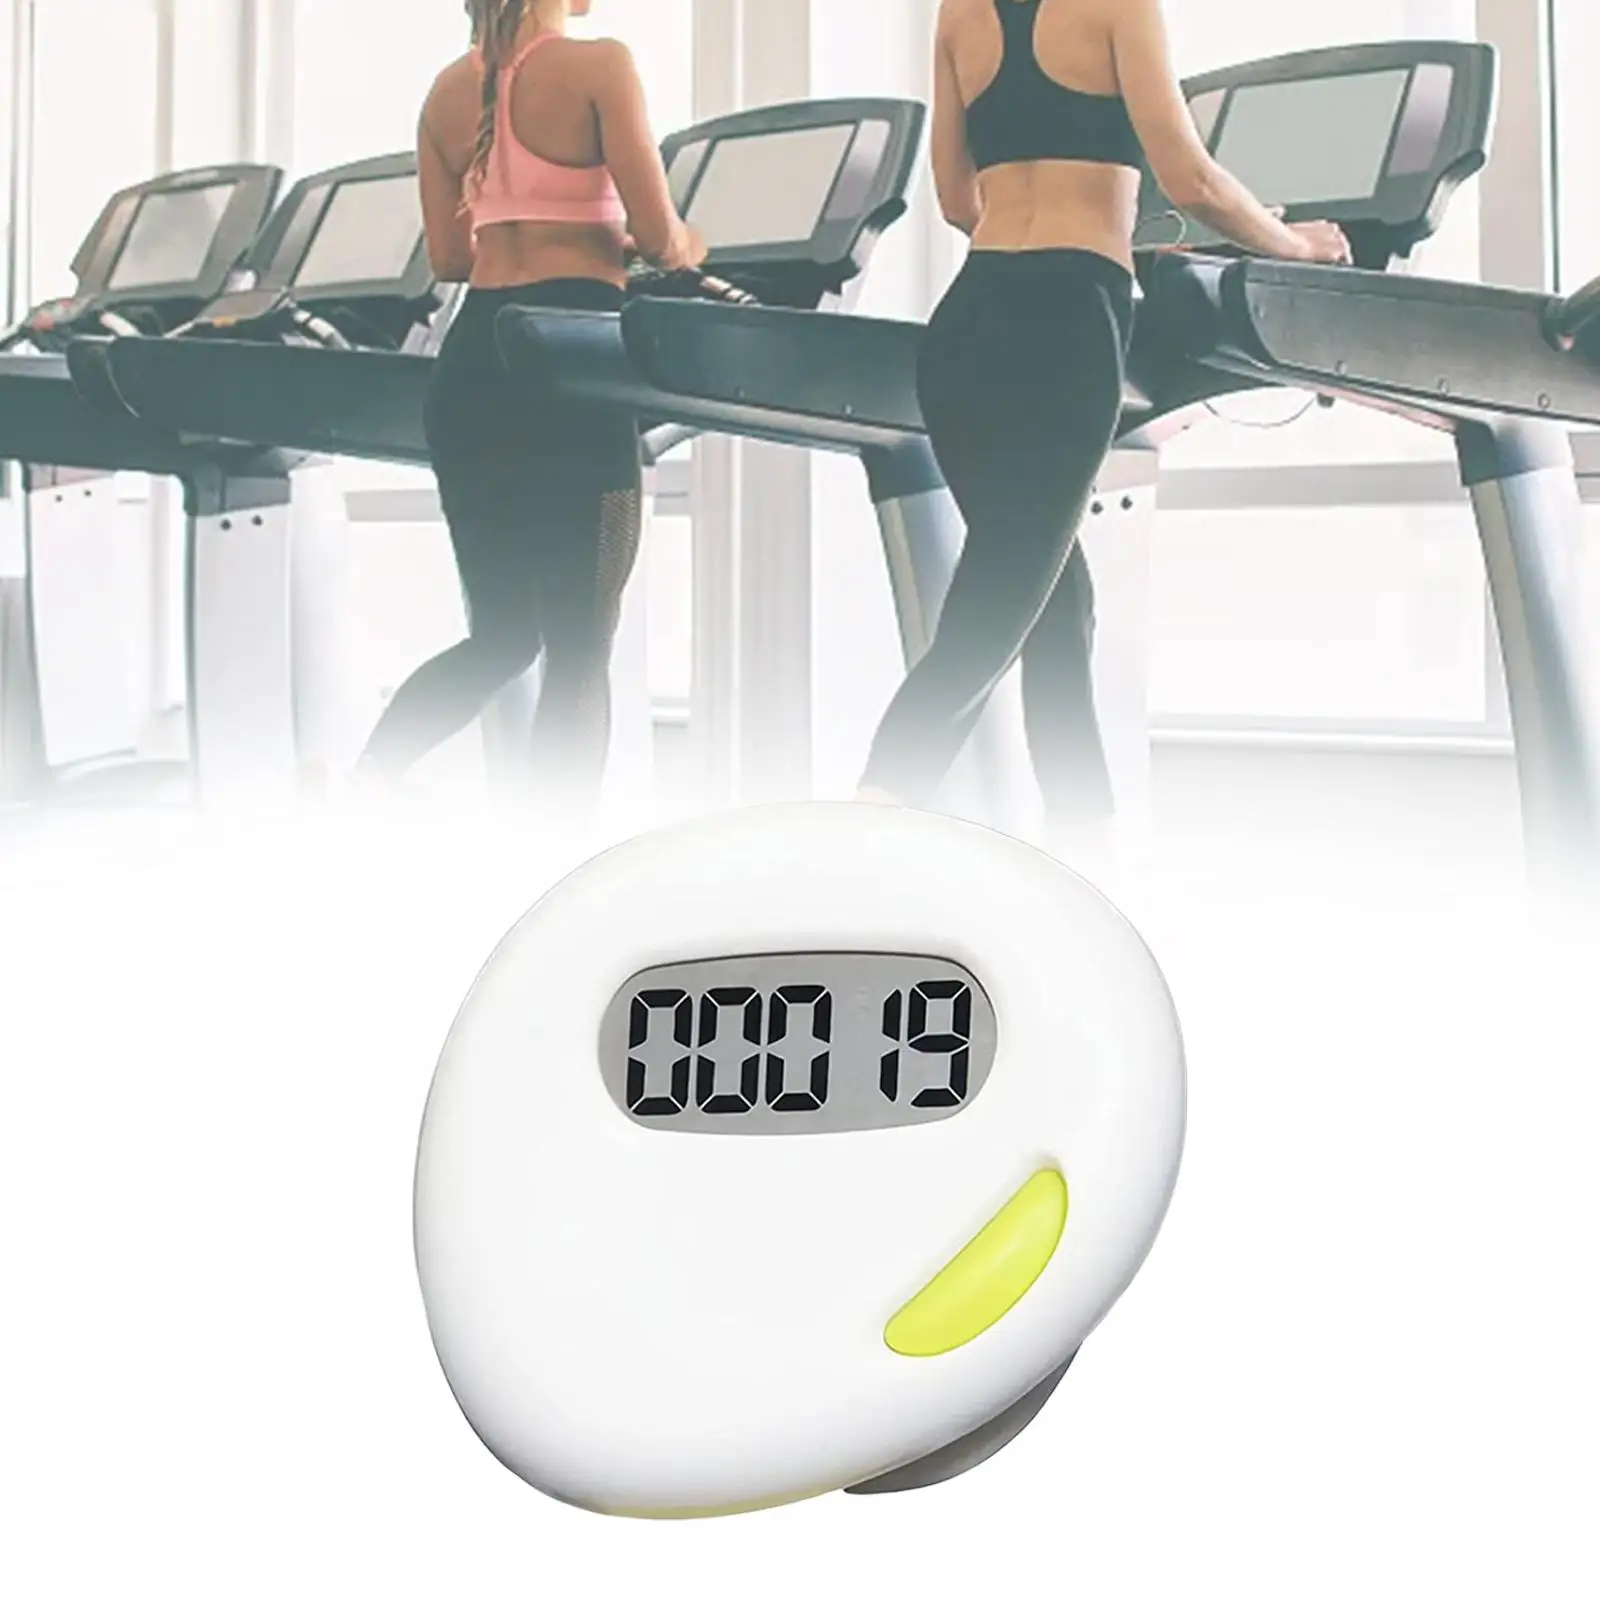 2D Pedometer Electronic Pedometer Walk Motion Calorie Distance Counting Exercise